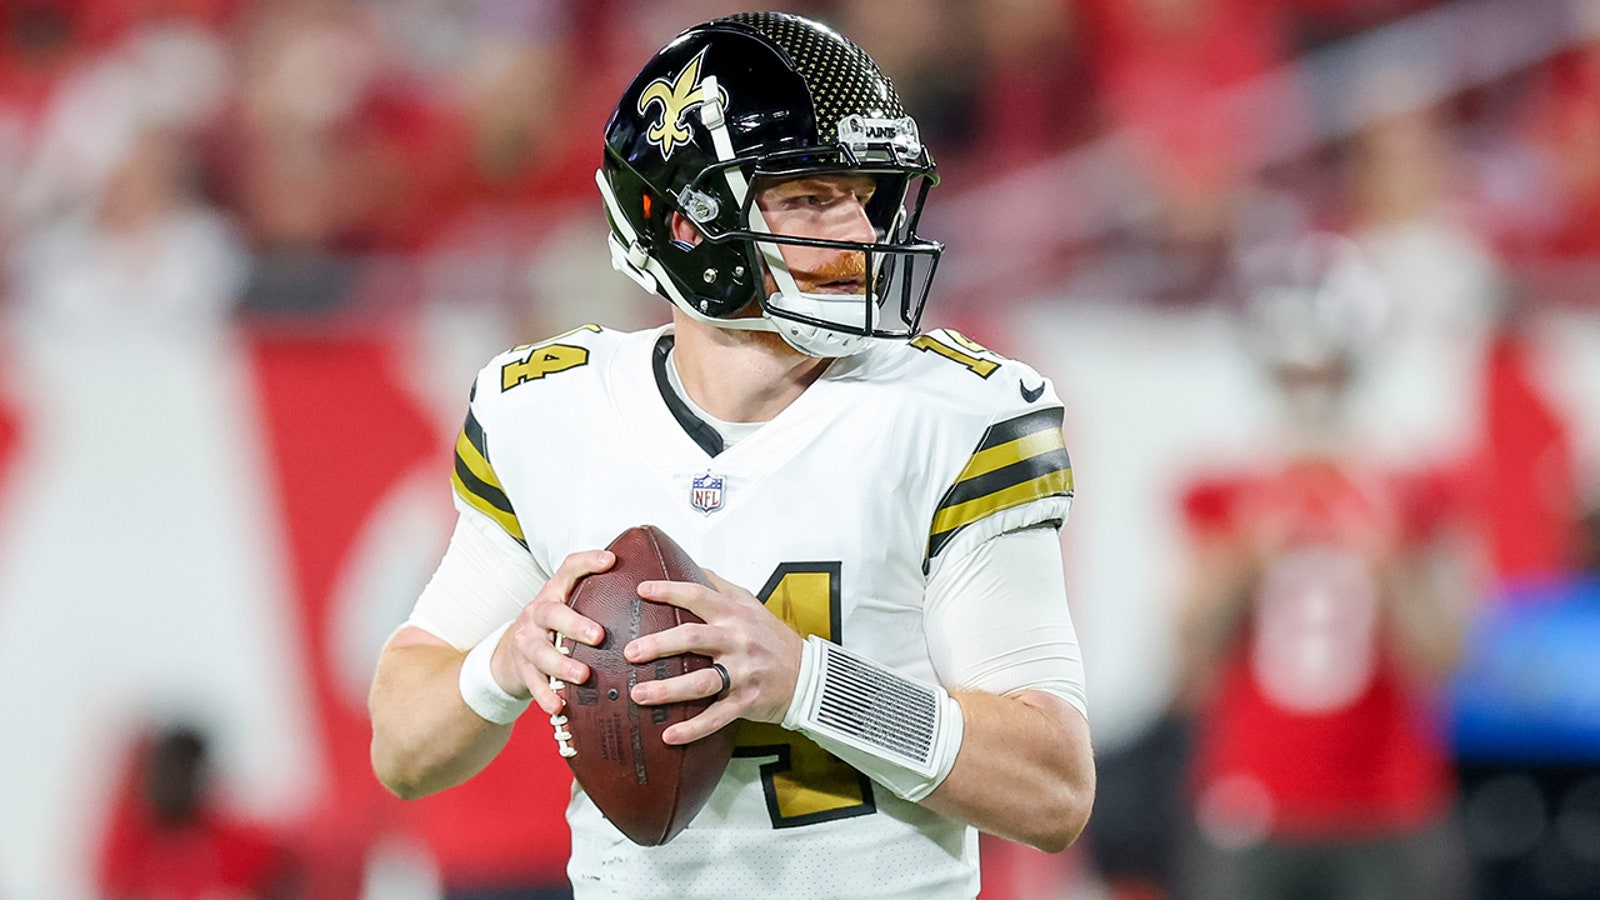 NFL Week 15: What should you bet on in the Falcons-Saints matchup this weekend?